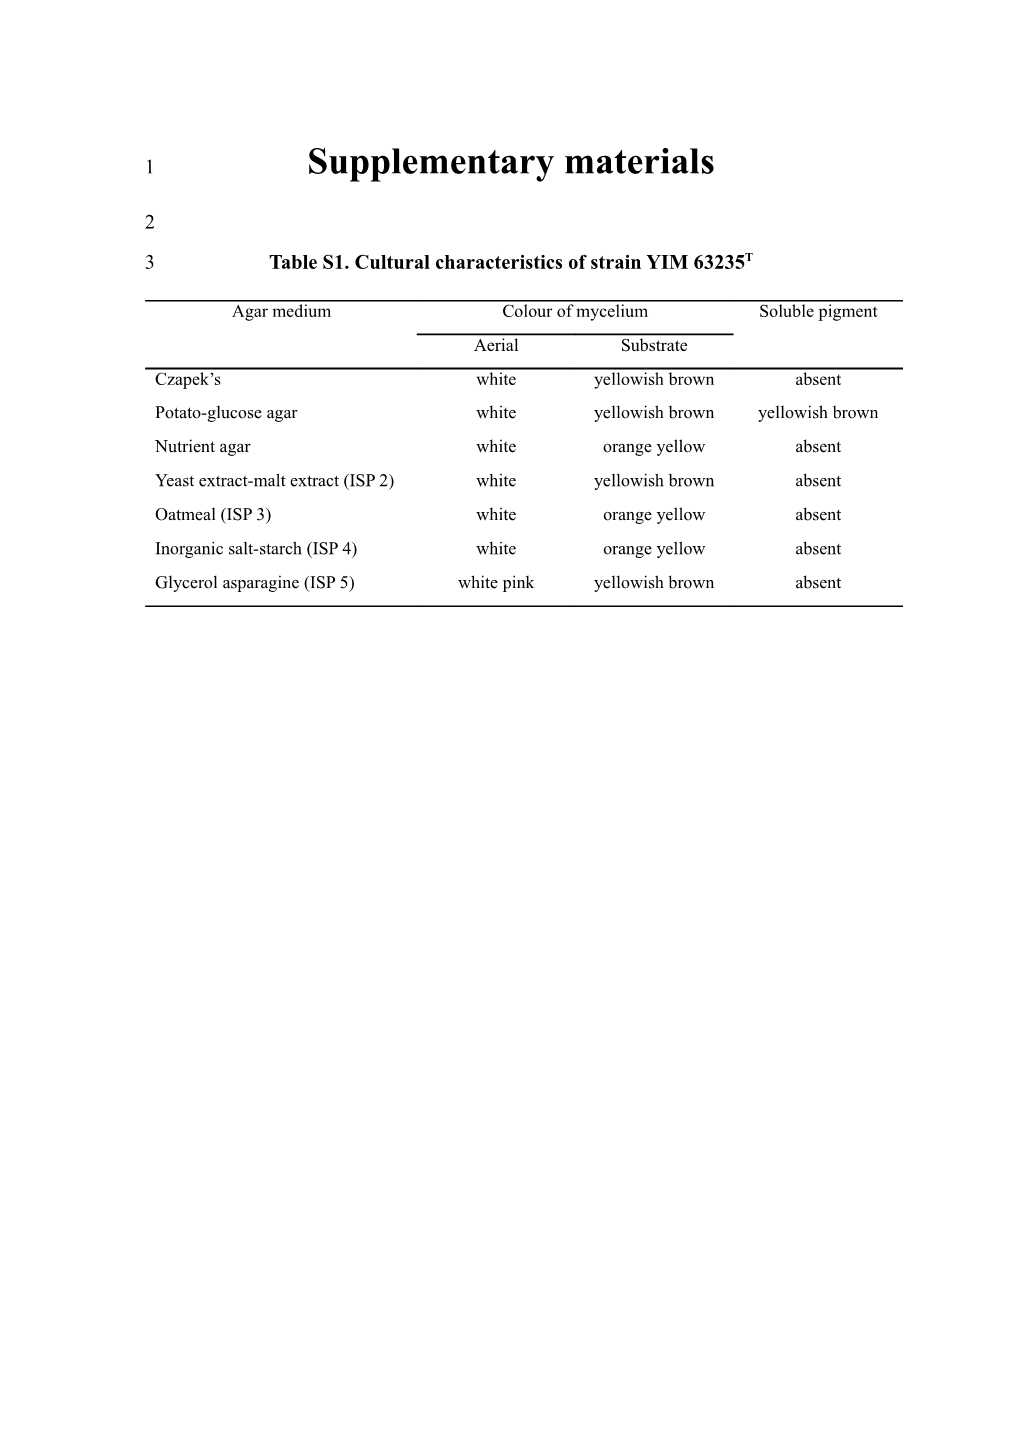 Table S1.Cultural Characteristics of Strain YIM 63235T